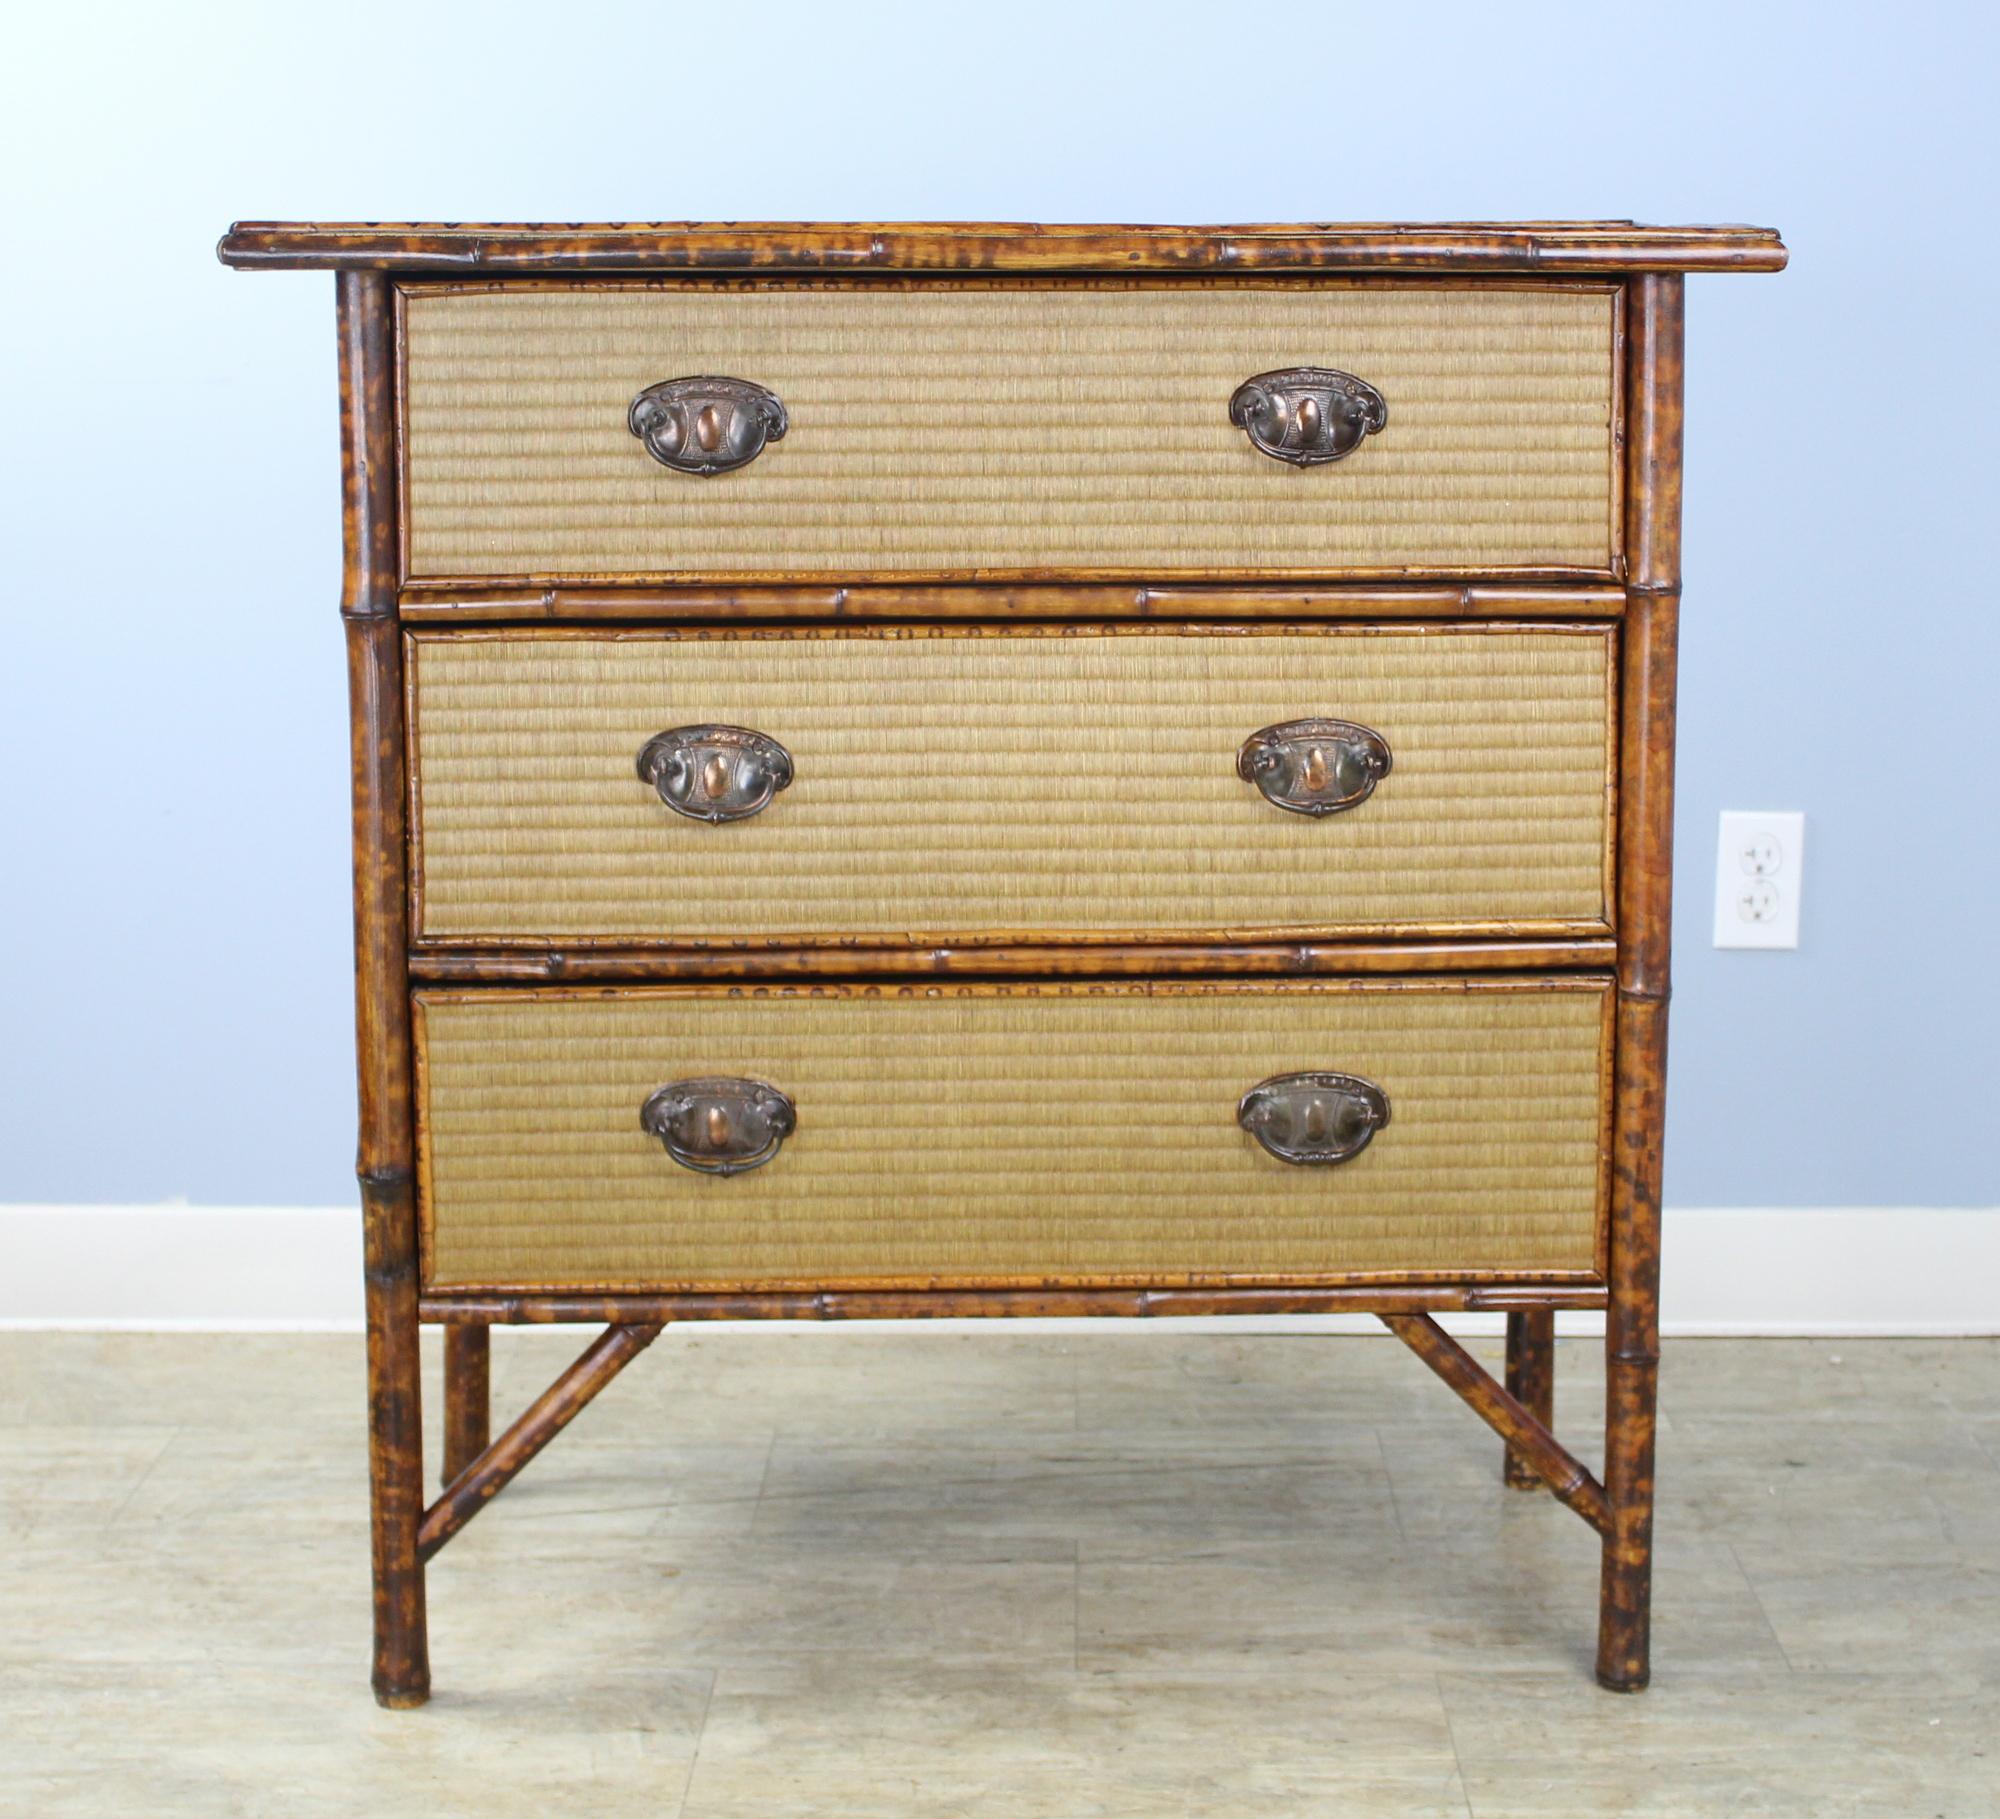 A smart and highly decorative bamboo and rattan chest of drawers. The rattan is in very good condition as is the vibrant bamboo. An excellent choice for a country bedroom or hall. Brass escutcheons may not be original but complement the style and